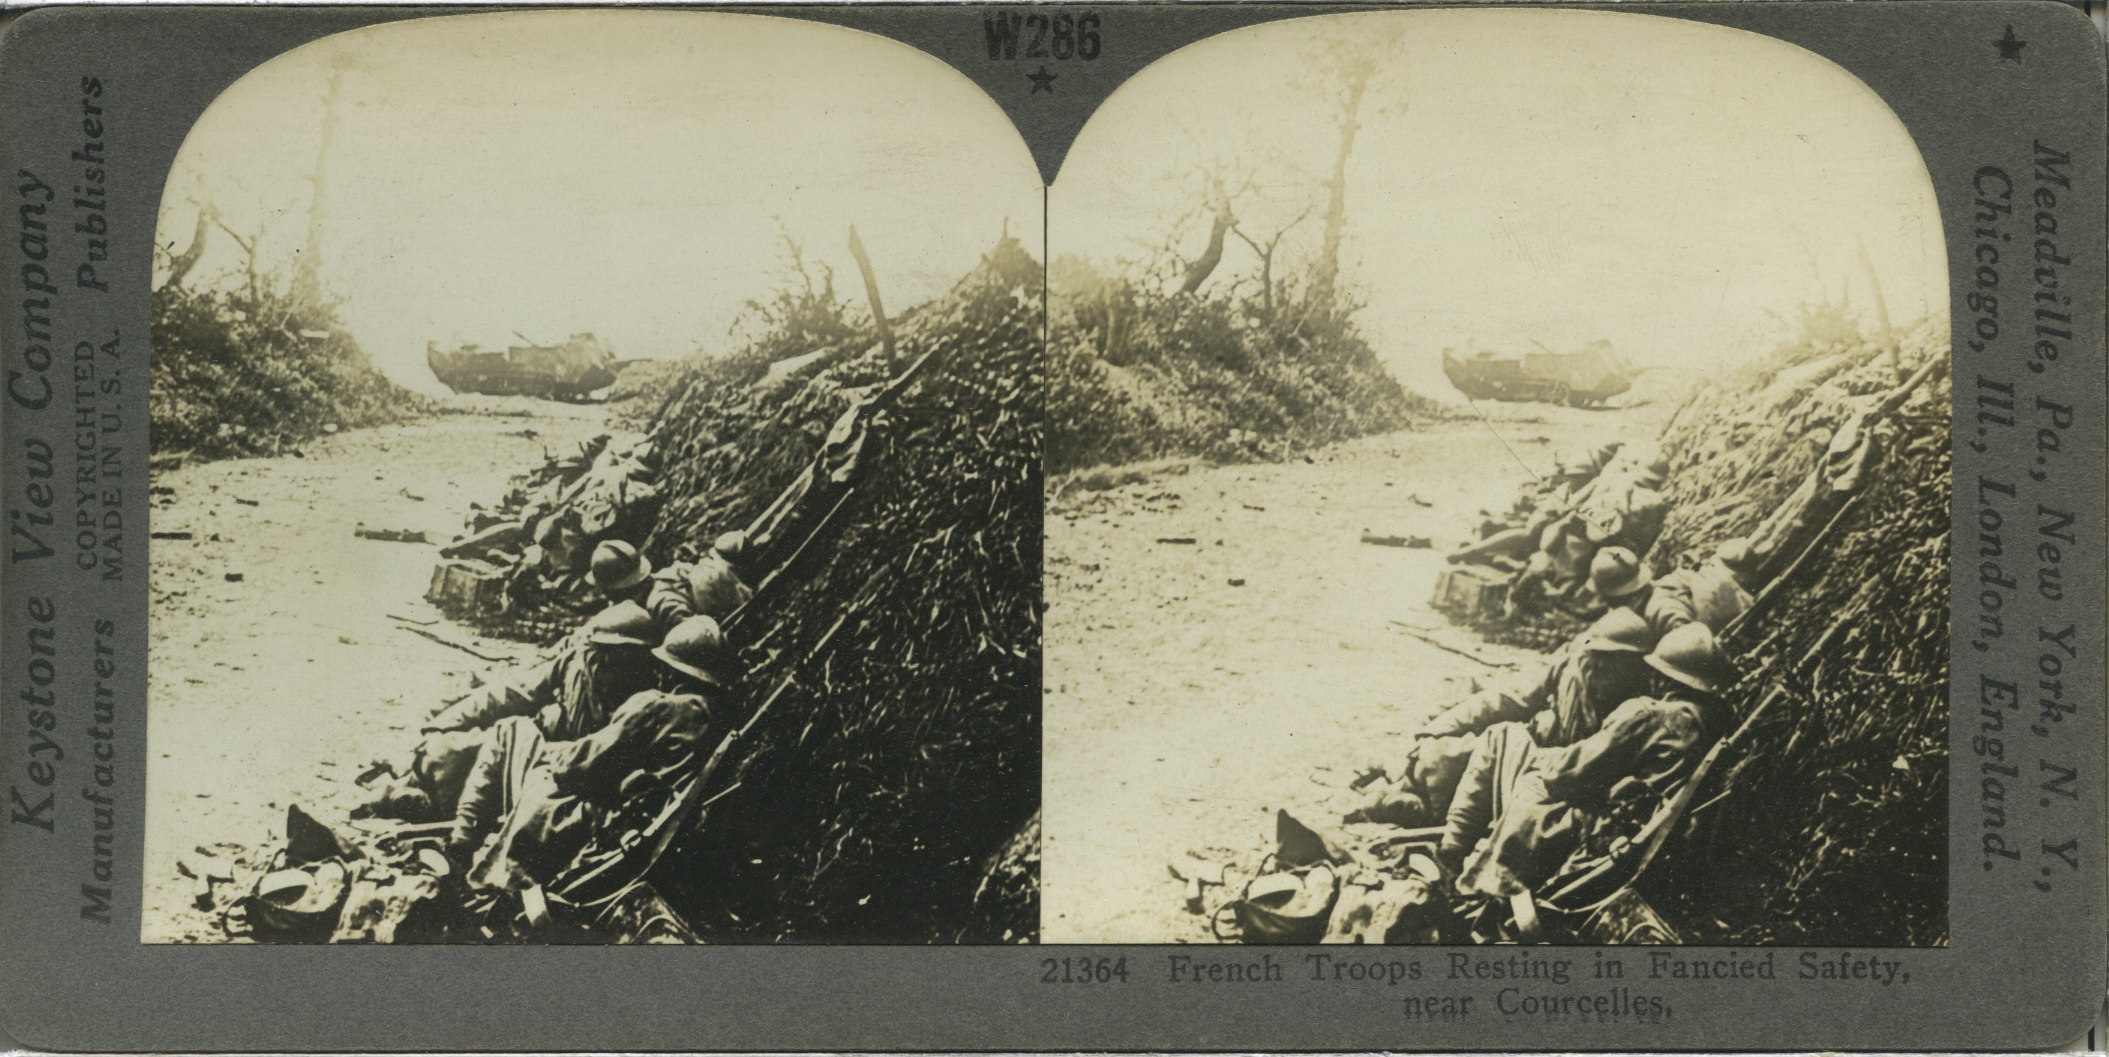 French Troops Resting in Fancied Safety, near Courcelles